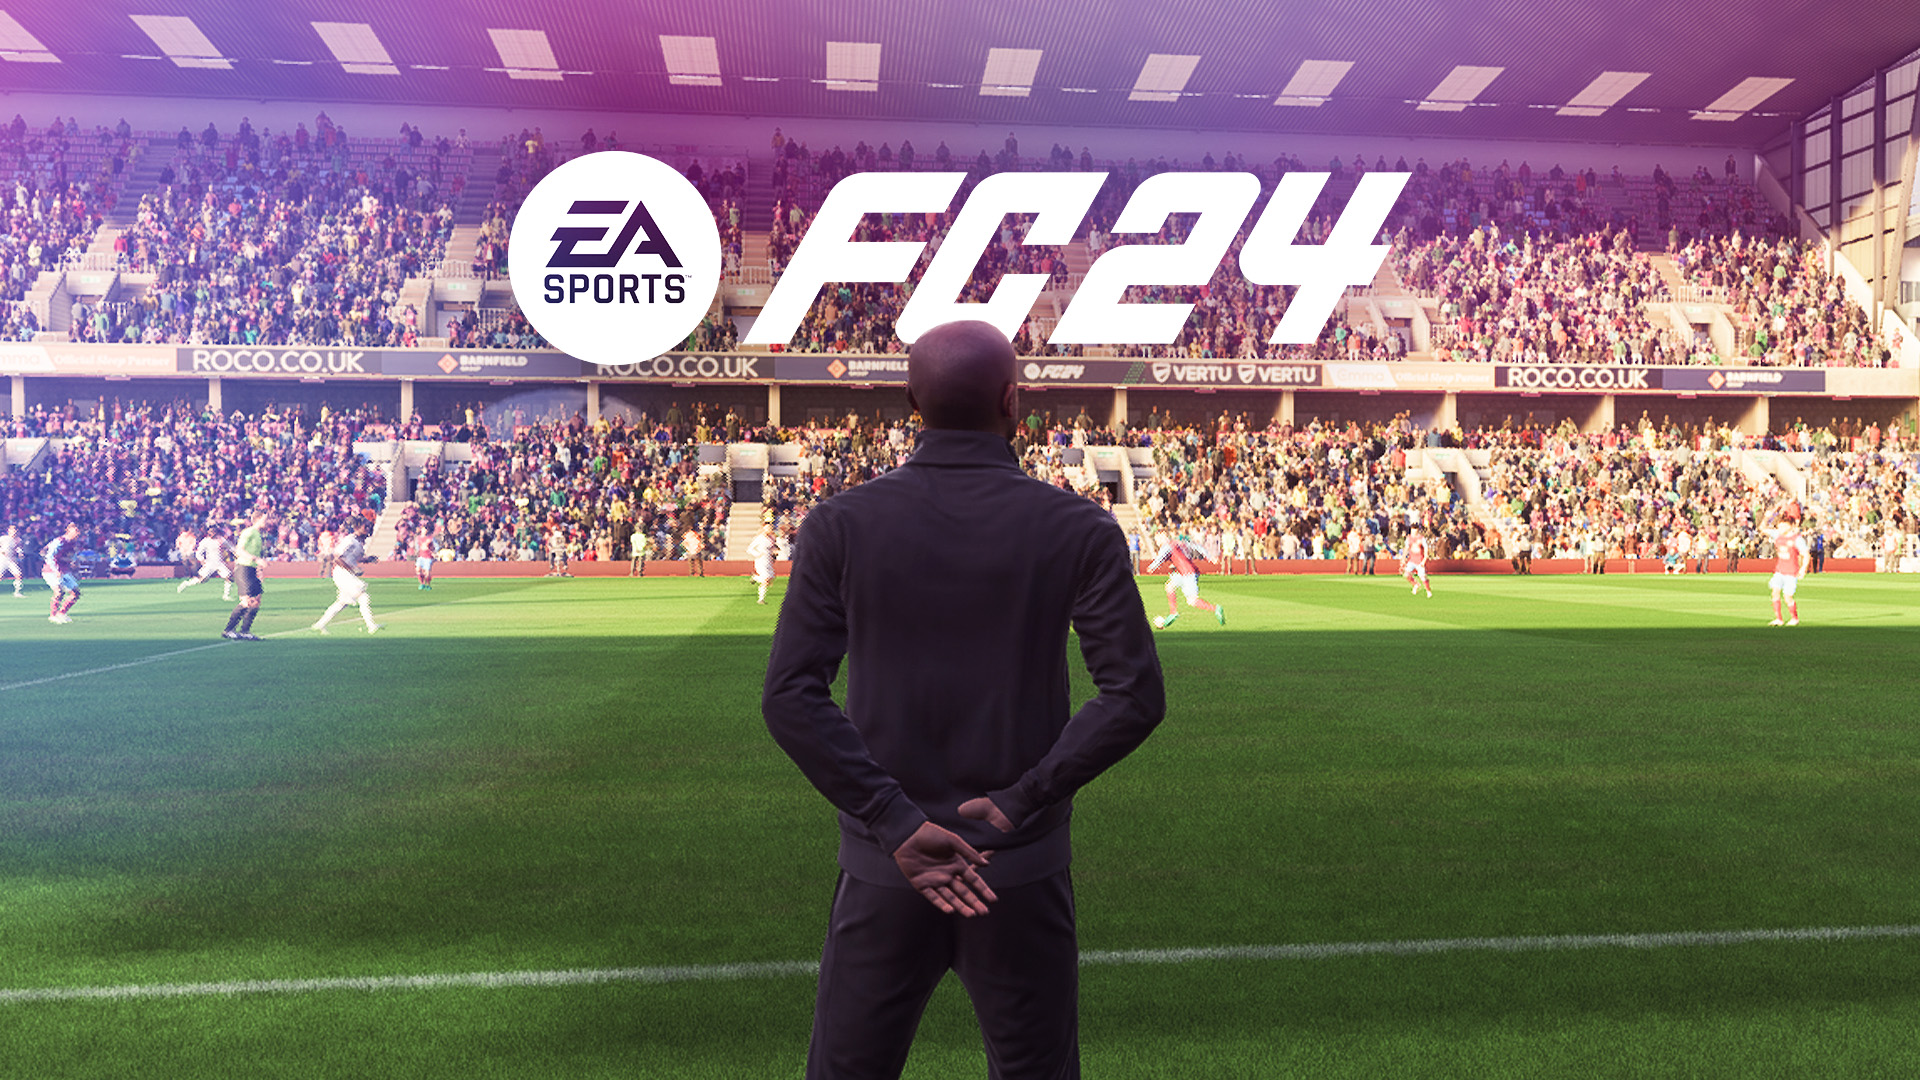 EA Sports FC 24 Career Mode: best Tactical Visions you should use